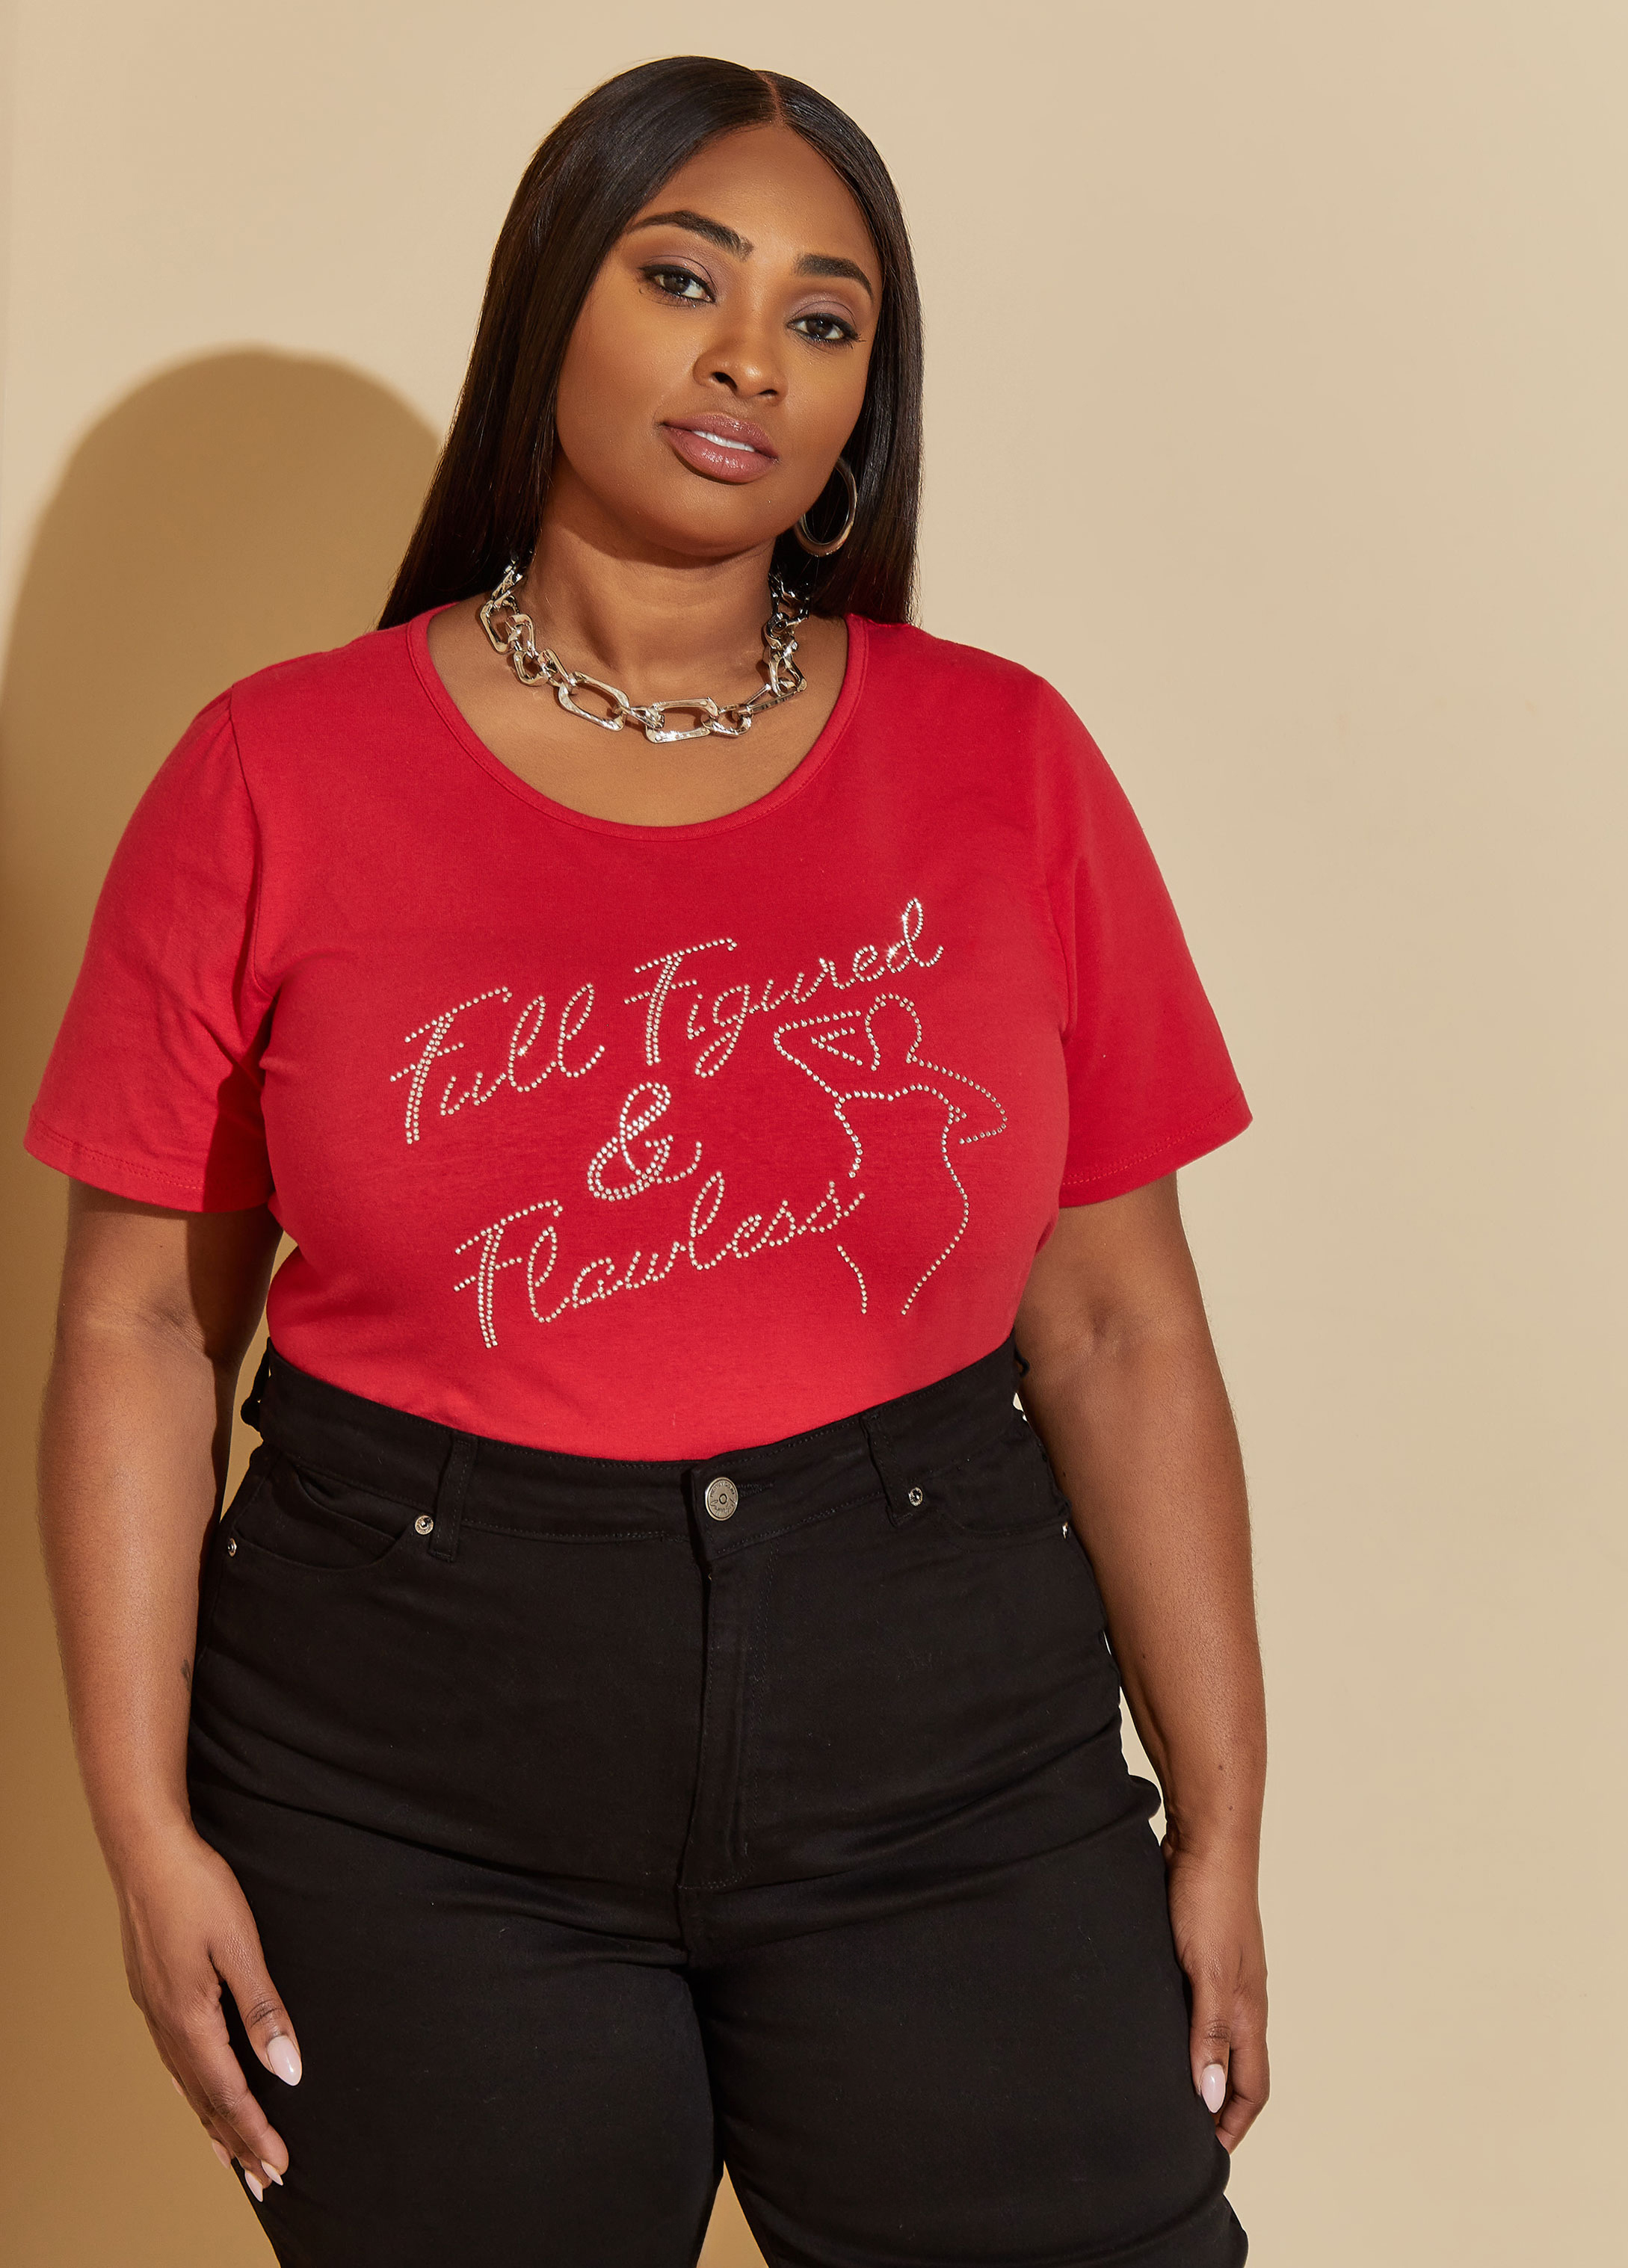 Plus Size tee plus size t-shirt flawless plus size graphic tee